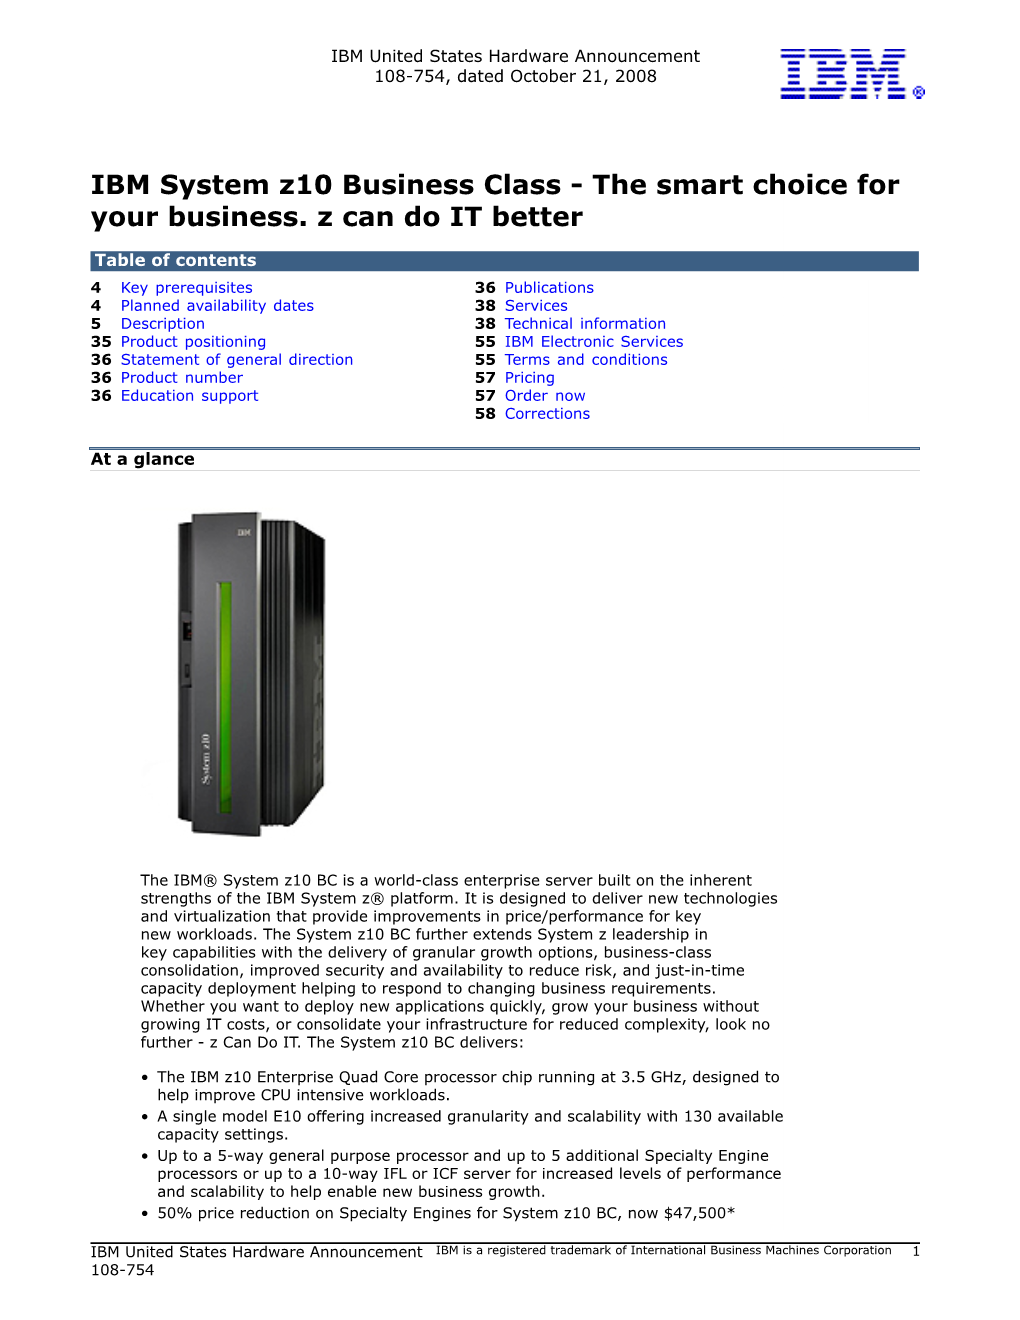 IBM System Z10 Business Class - the Smart Choice for Your Business